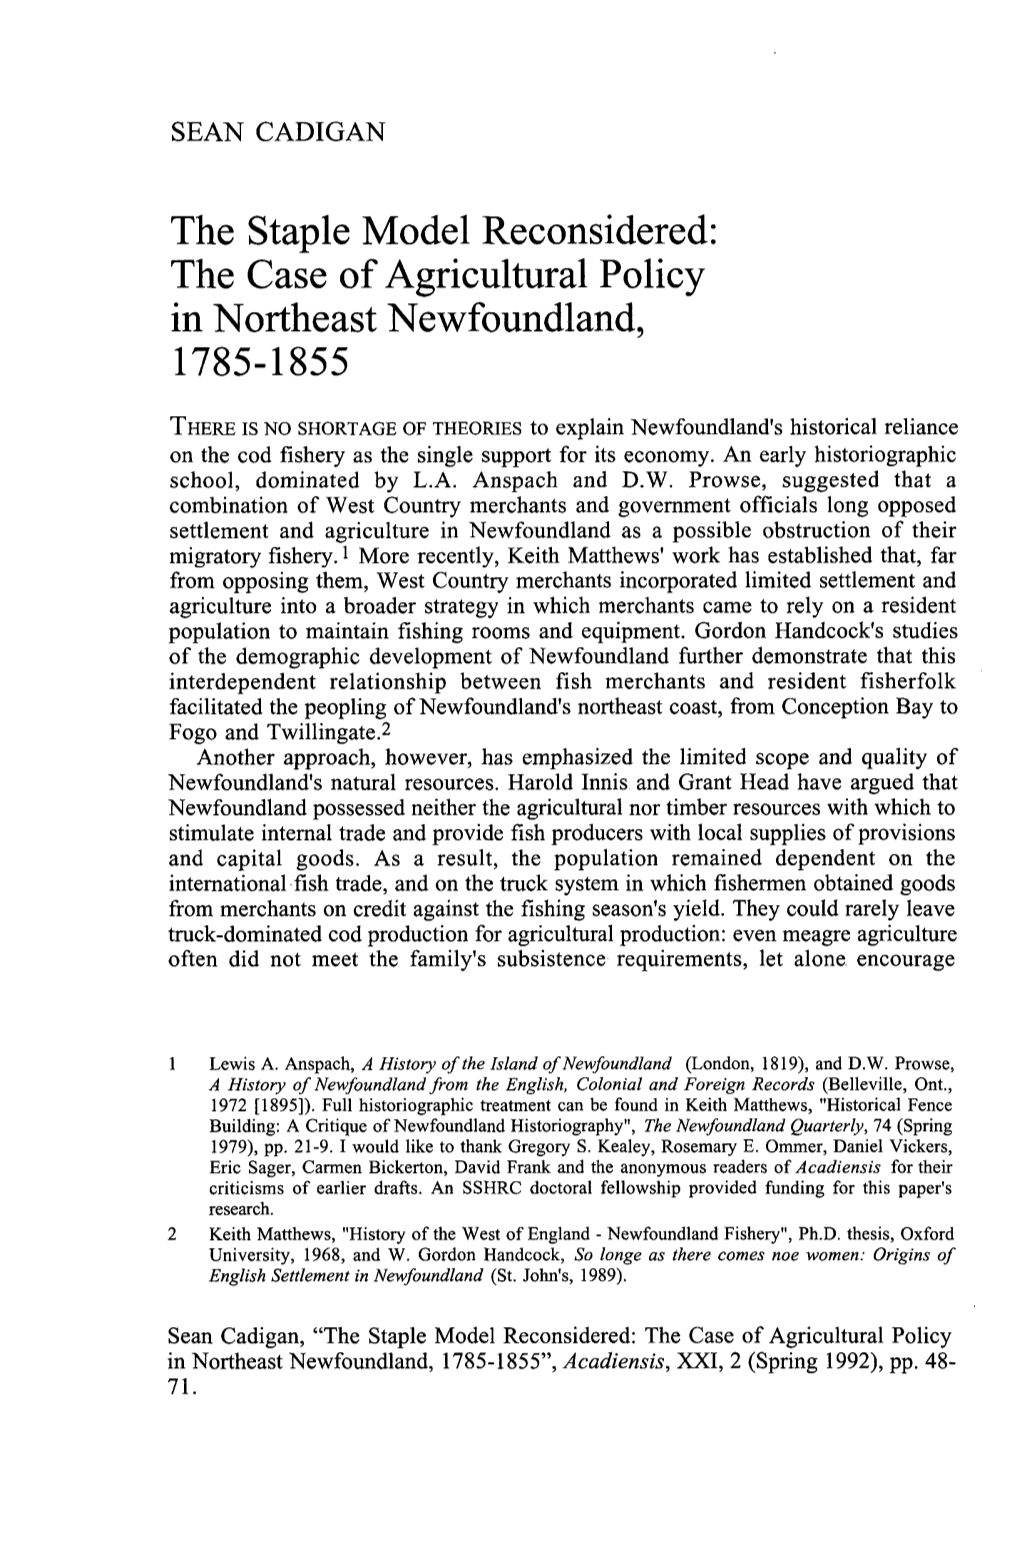 The Case of Agricultural Policy in Northeast Newfoundland, 1785-1855